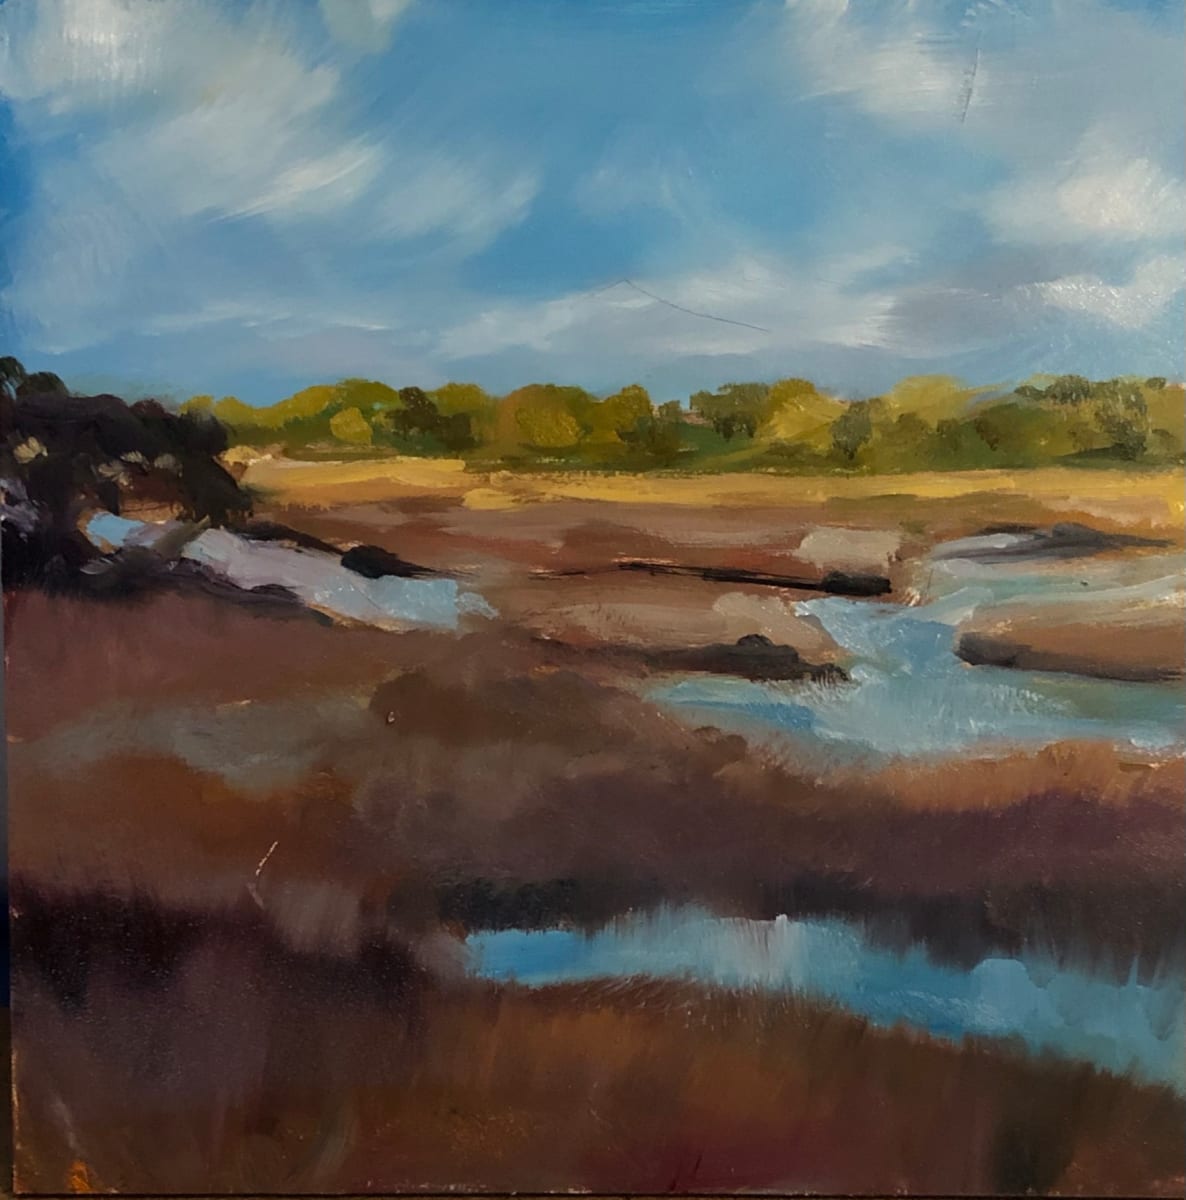 small scape-low country #6  Image: Scape Sketch Collection-special places on my journey of life

scape sketch-low country #6

6x6 oil on ampersand museum gesso panel 2022

This painting was inspired by the views of the marshlands in the low country of South Carolina.